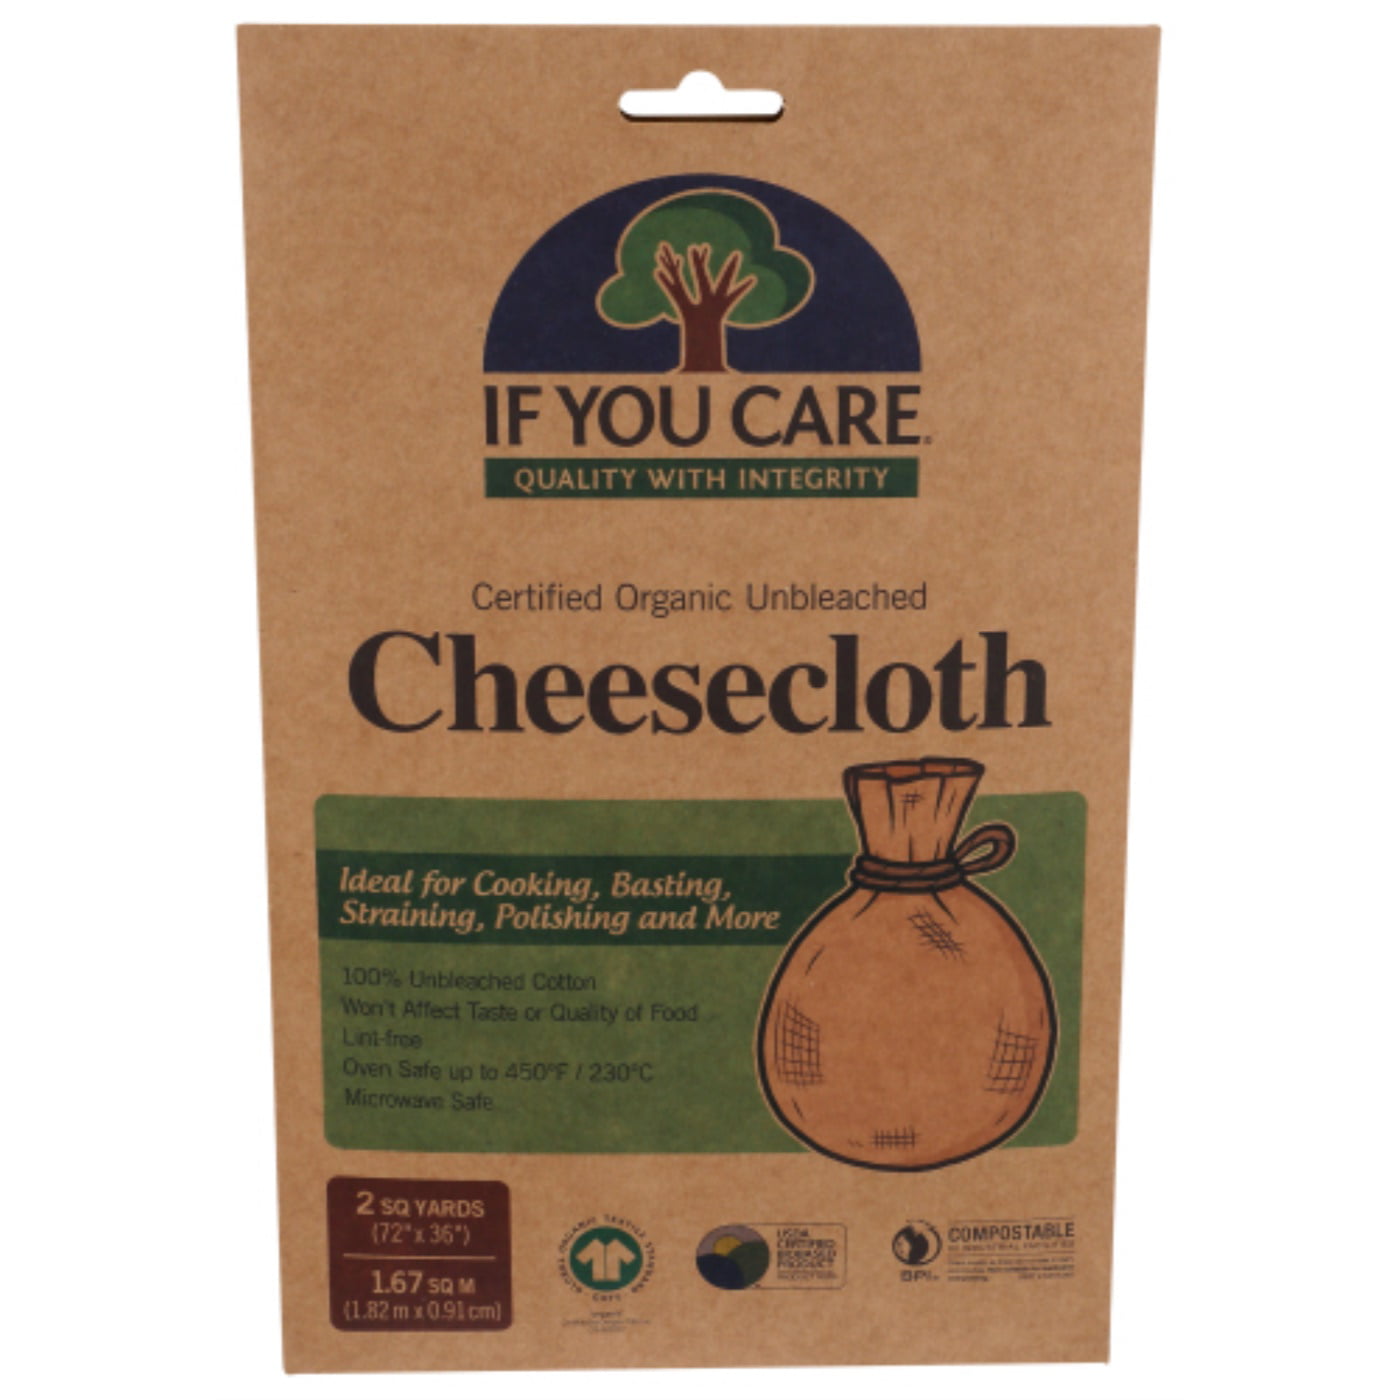 2-Square Yard Trimaco SuperTuff 100-Percent Cotton Bleached Cheesecloth 